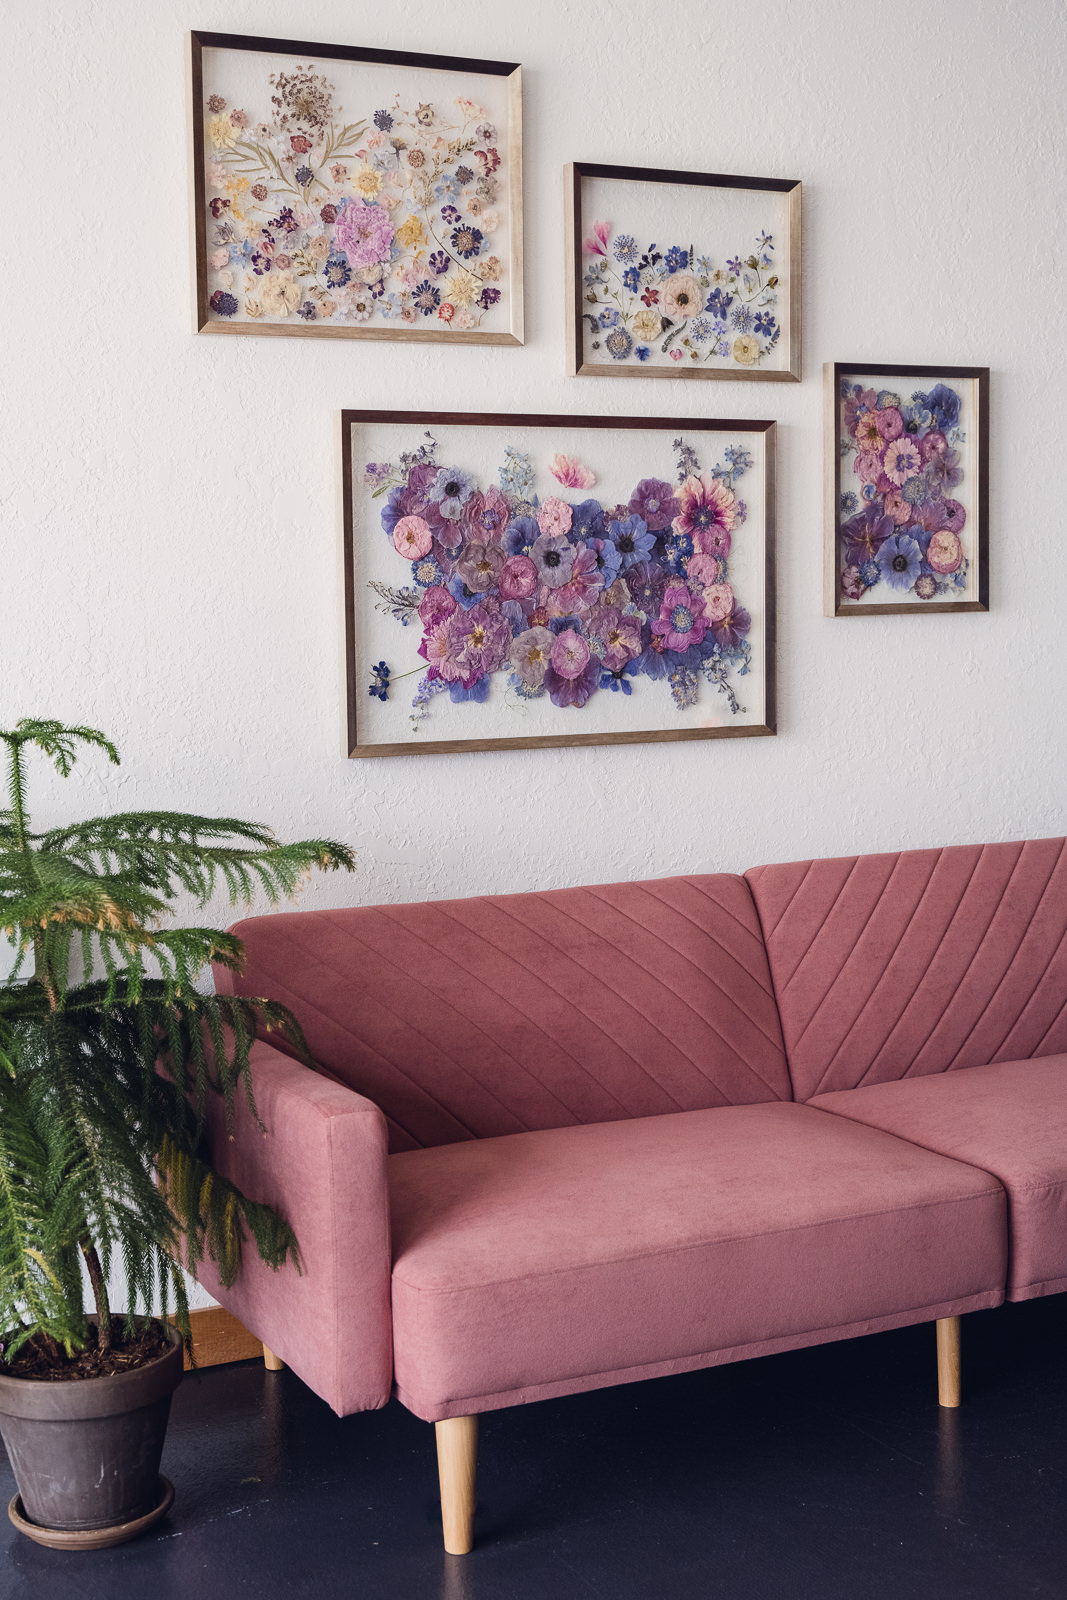 pressed flower bouquet preservation art set hanging on the wall over a rose colored couch